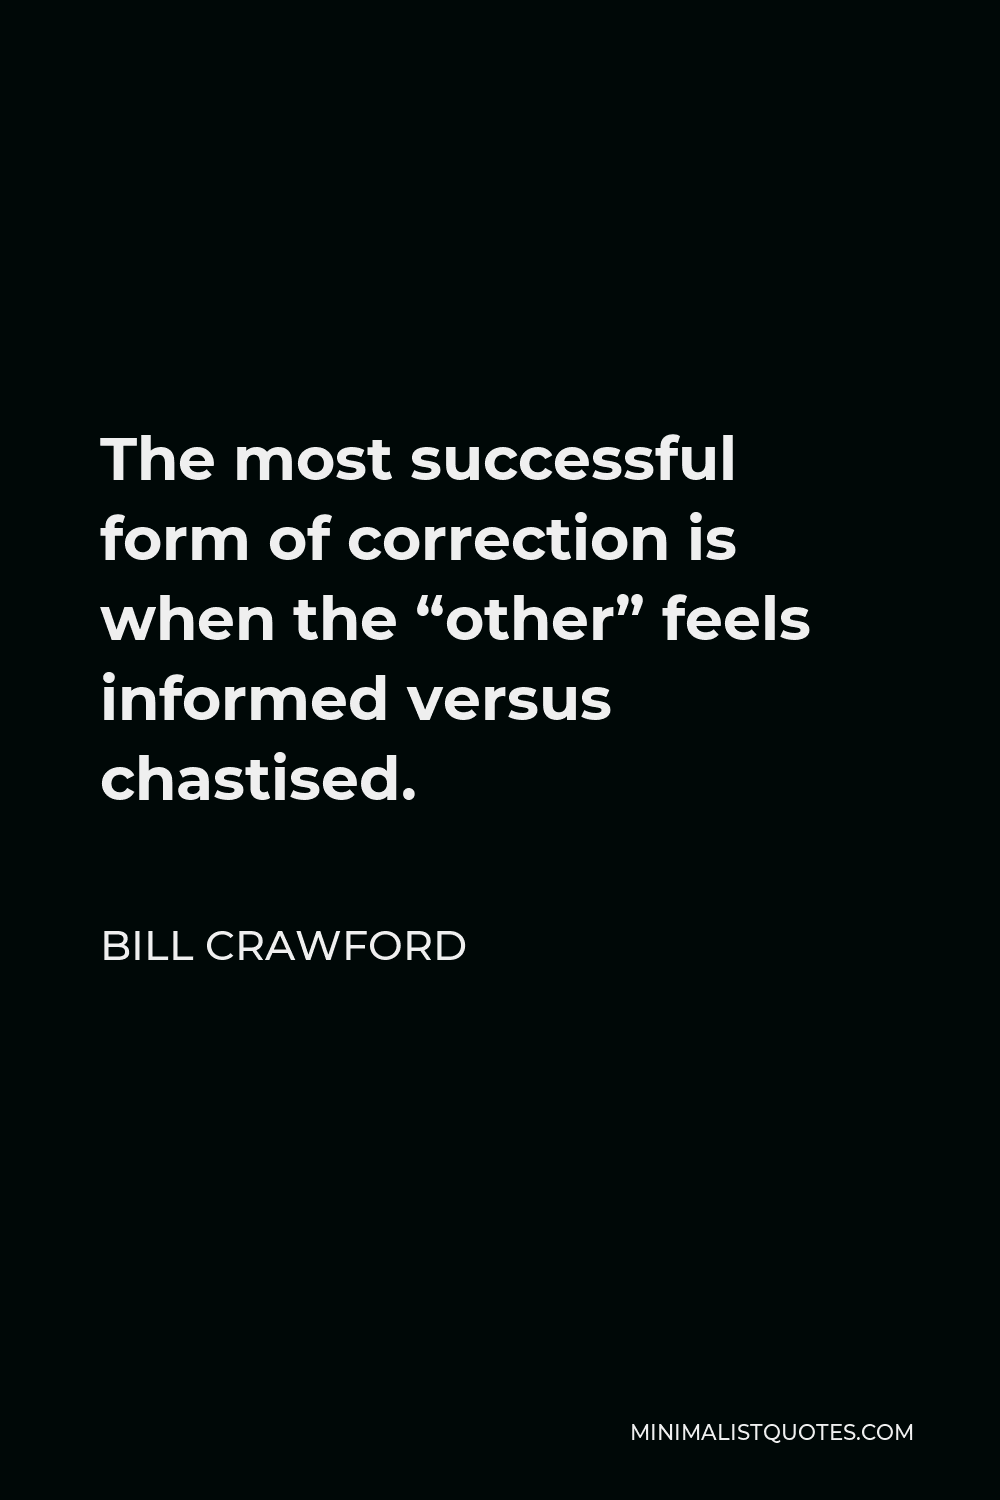 Bill Crawford Quote - The most successful form of correction is when the “other” feels informed versus chastised.